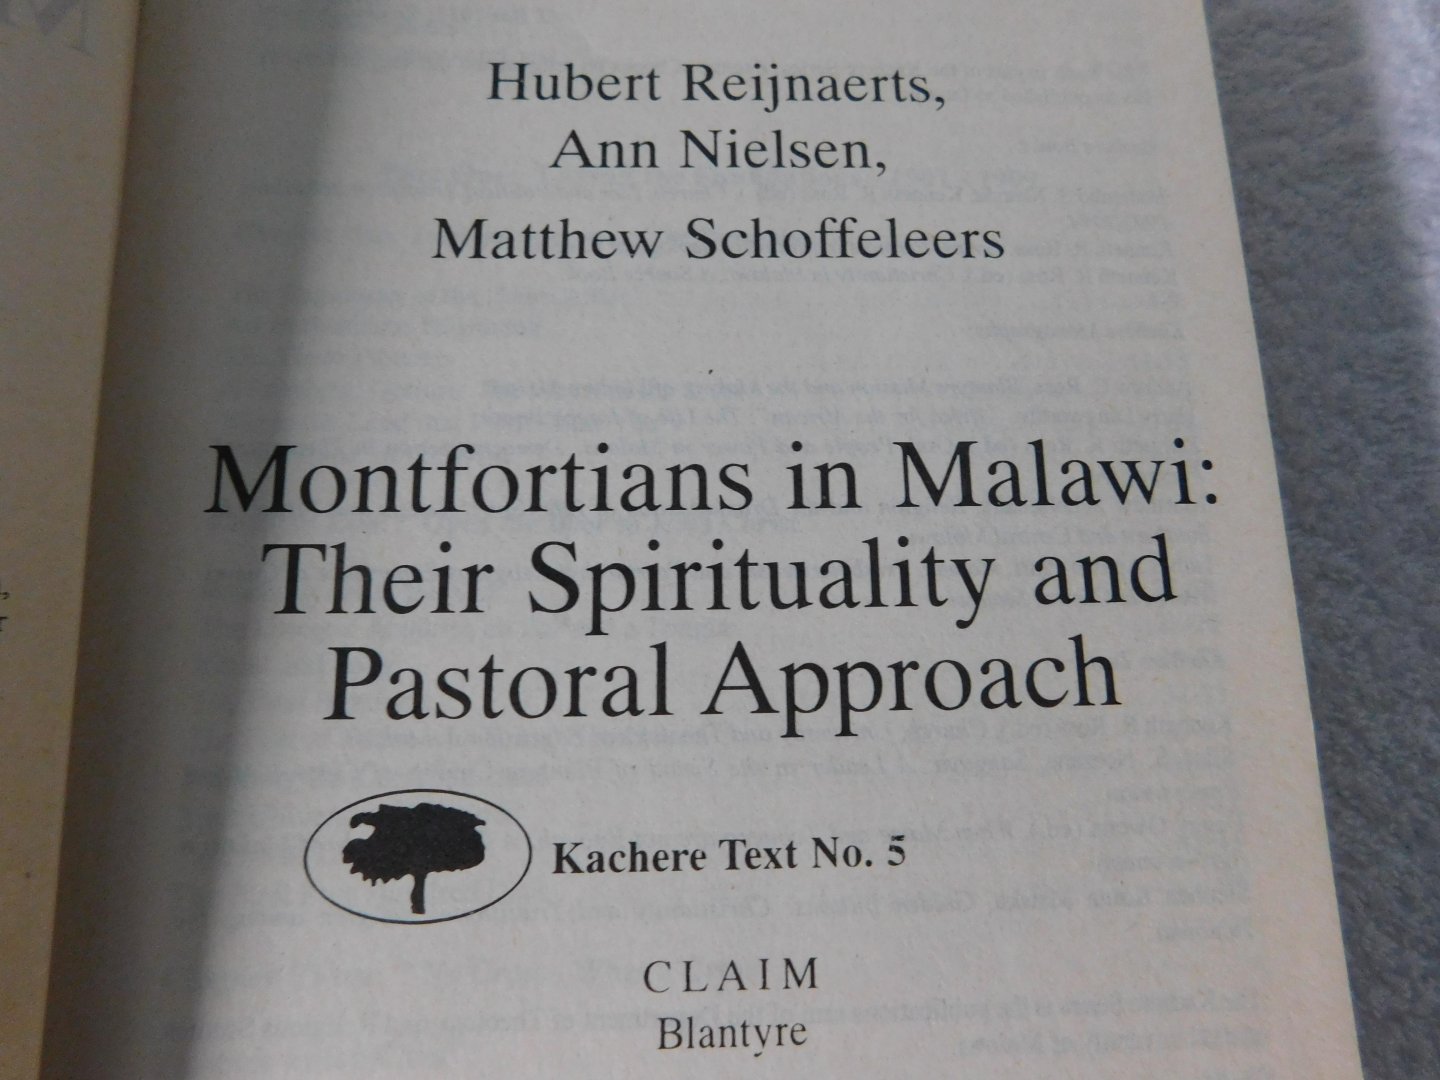 Hubert Reijnaerts - Montfortians in Malawi: Their Spirituality and Pastoral Approach (Kachere Texts)